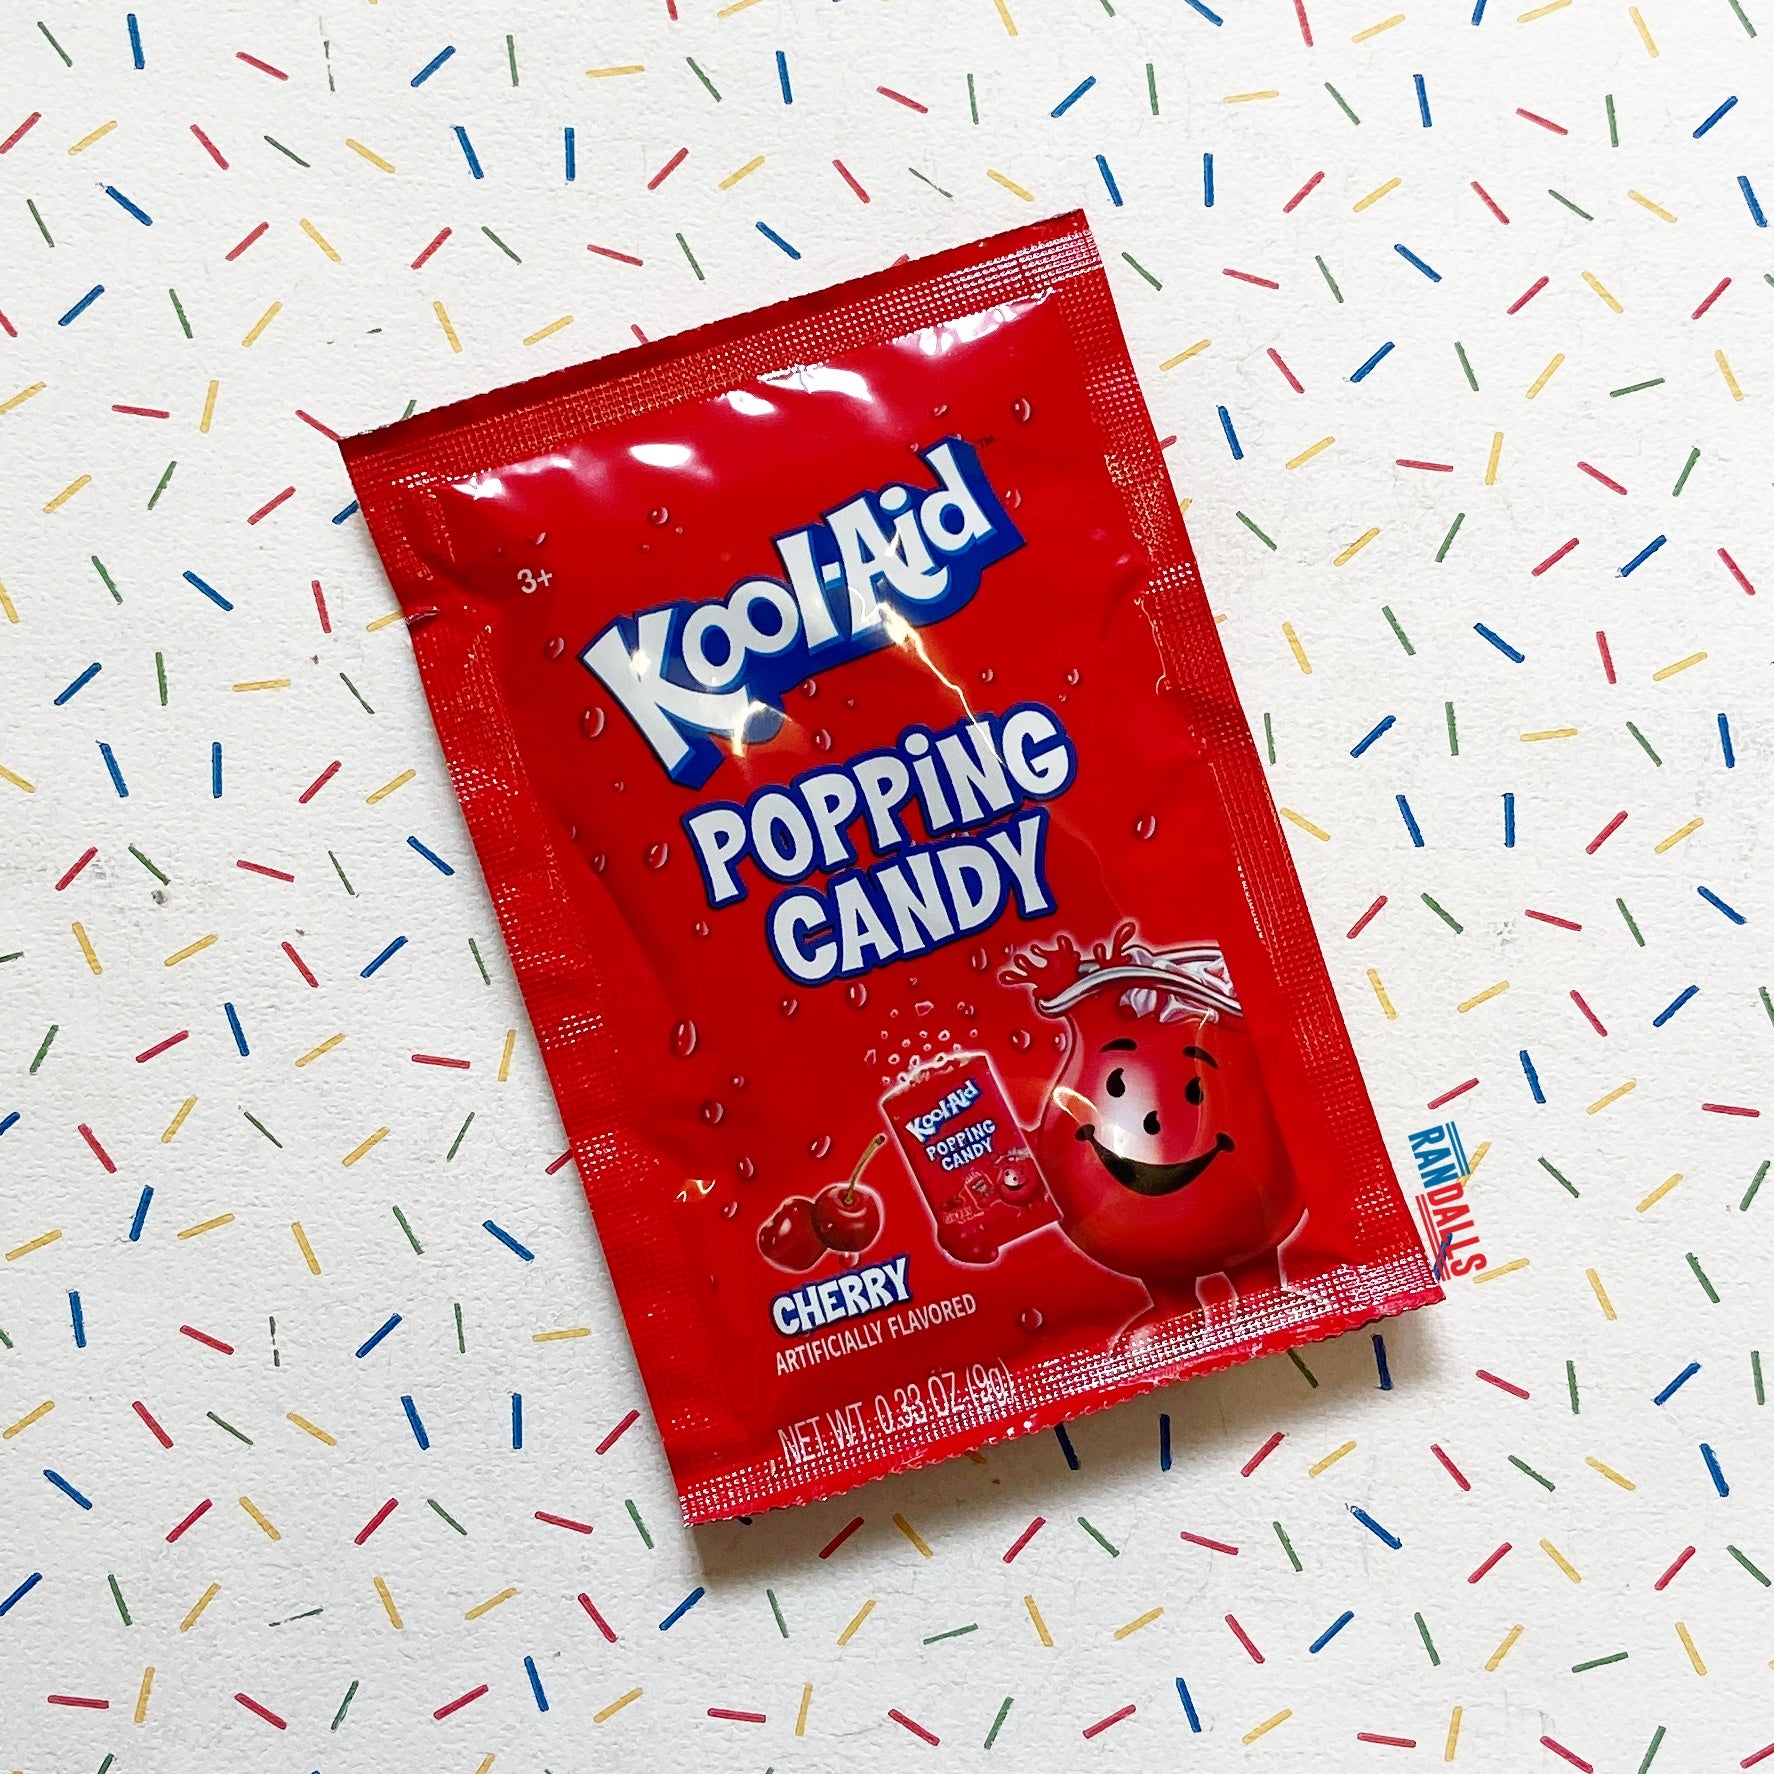 kool-aid popping candy cherry, pop rocks, crackling, sweets, candy, randalls